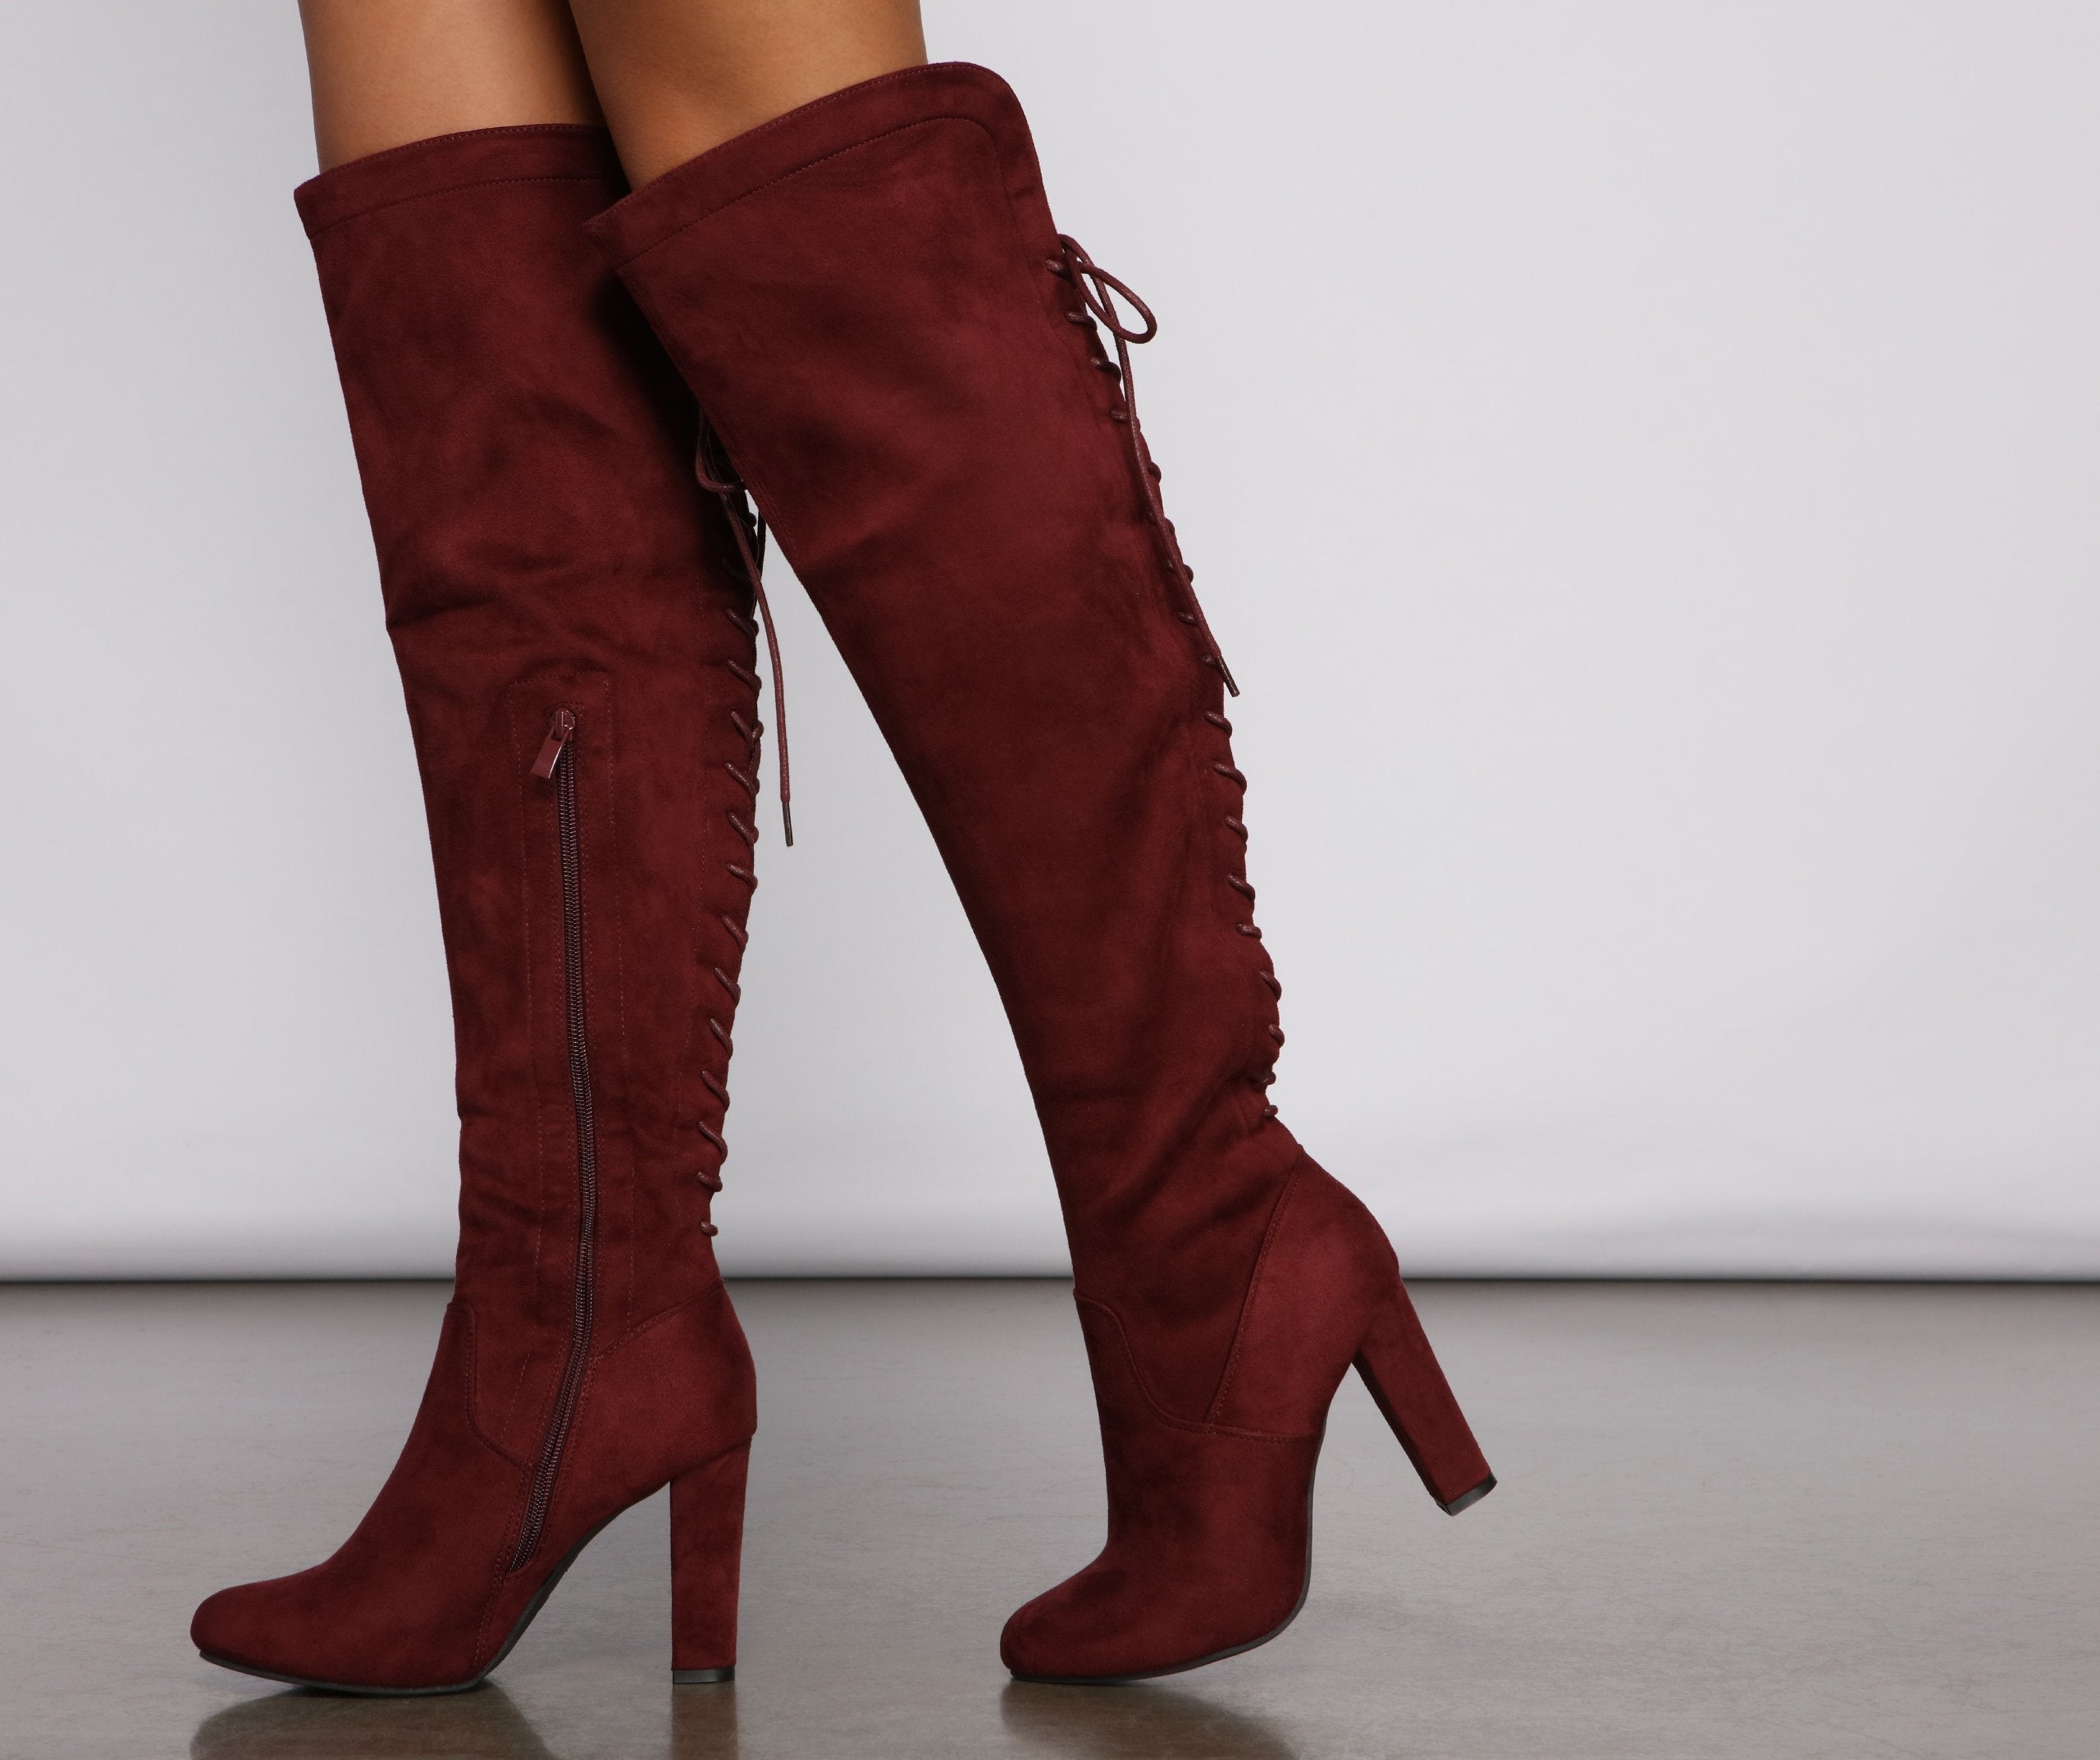 Lace Back Over The Knee Block Heeled Boots